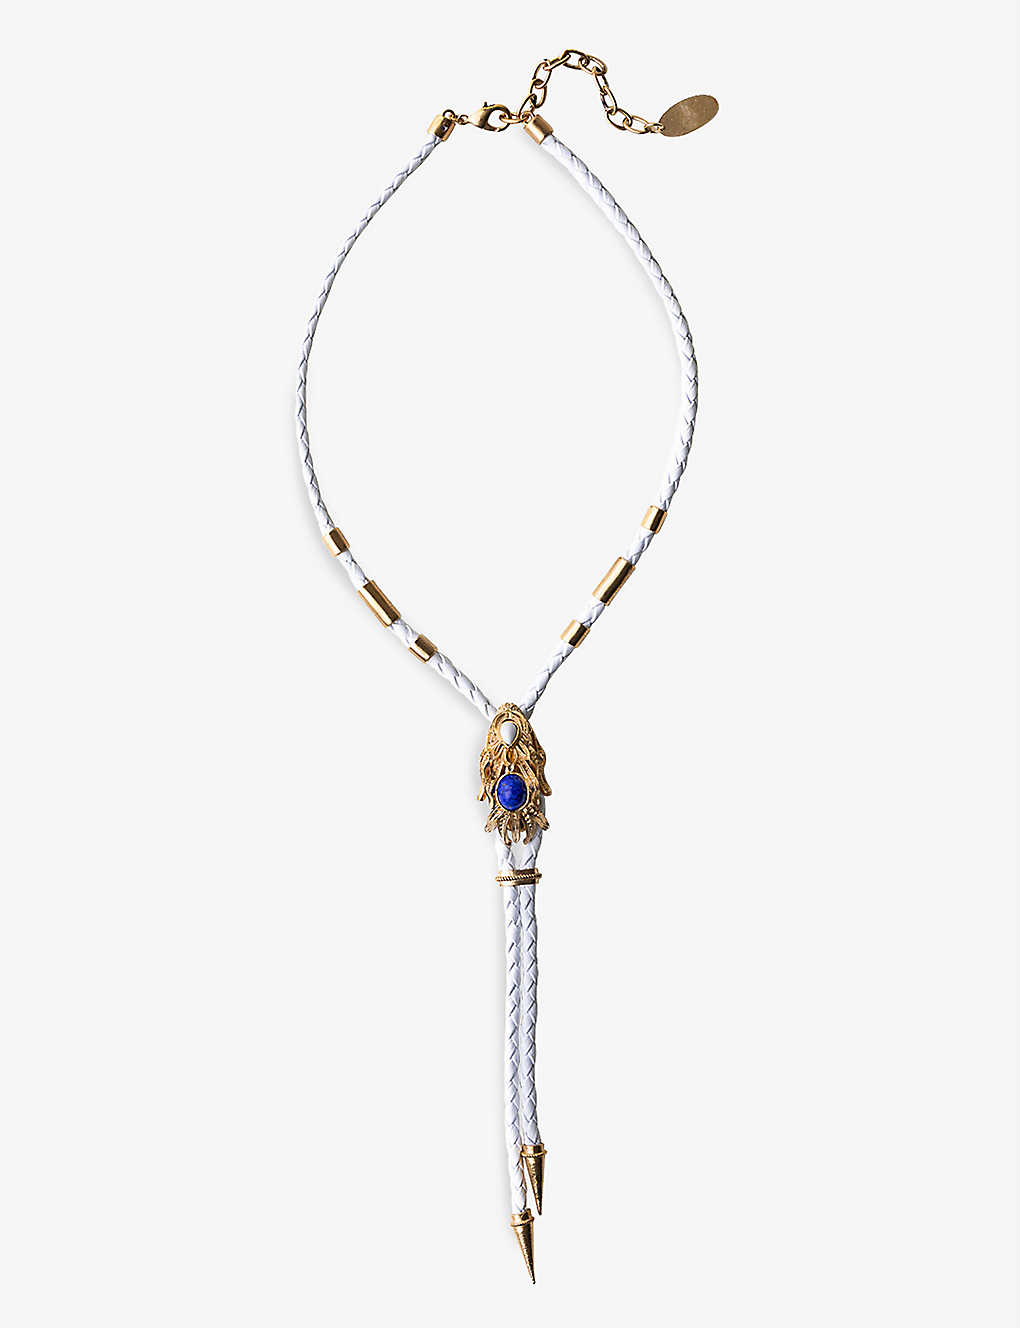 La Maison Couture Sonia Petroff Dragon Fish Leather And 24ct-gold Plated Lariat Necklace In White Gold